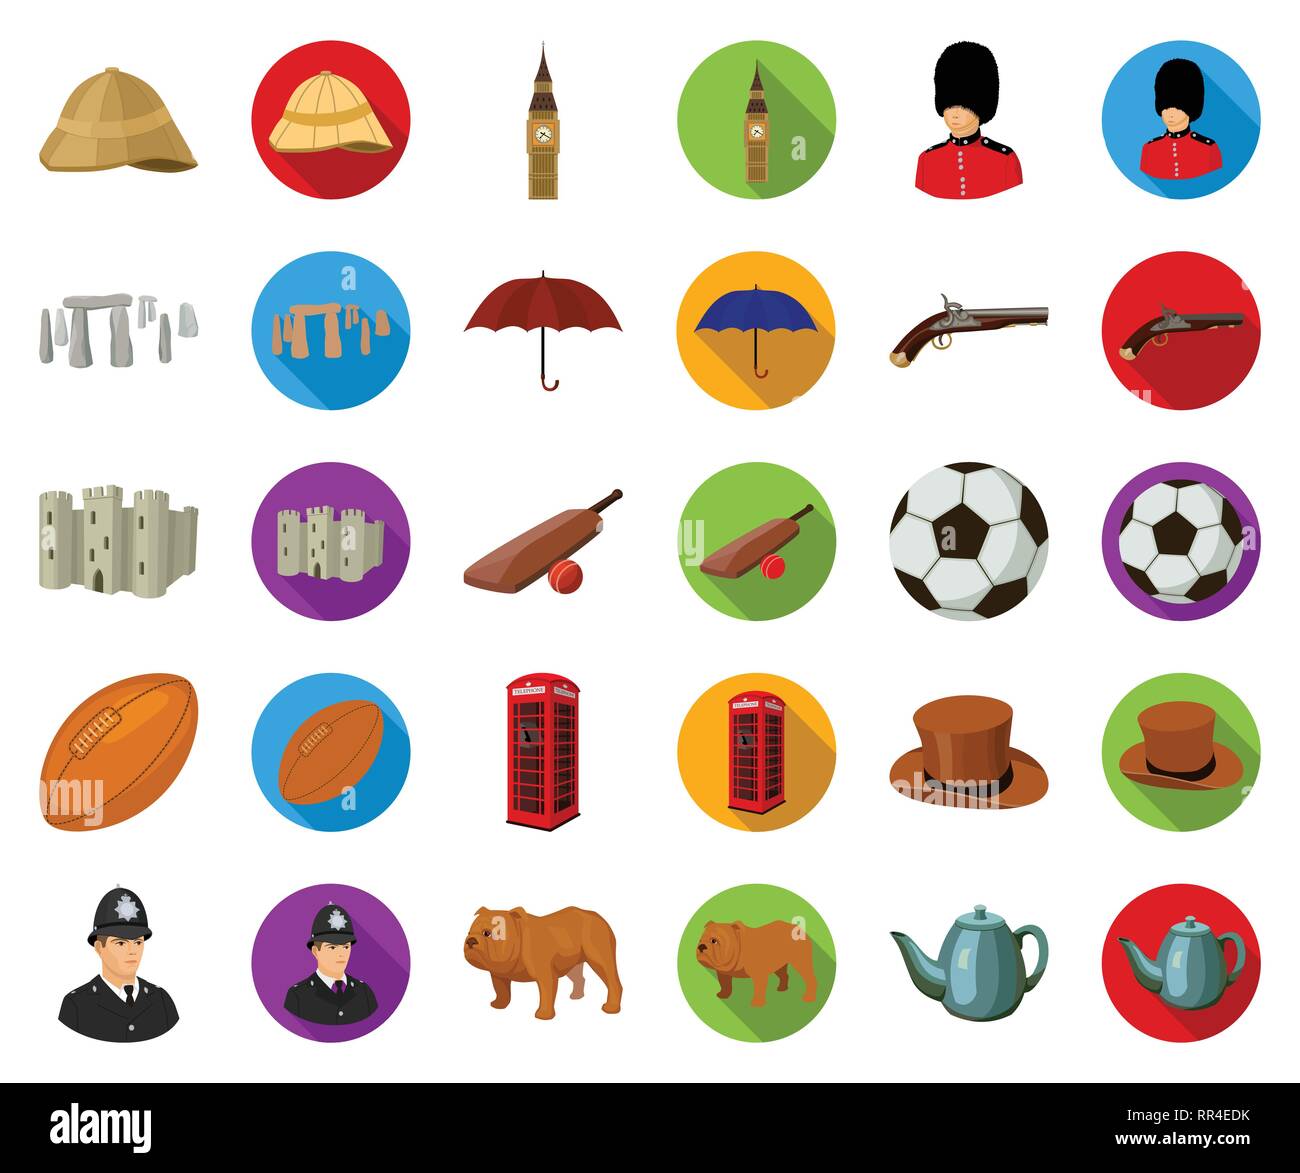 attraction,ball,bat,ben,big,bulldog,cabin,cartoon,flat,castle,collection,country,cricket,culture,design,england,english,football,guard,hat,helmet,icon,illustration,isolated,journey,light,logo,monument,phone,pistol,pith,population,queen,red,regby,set,showplace,sight,sign,stone,street,symbol,teapot,territory,top,tourism,traditions,traveling,umbrella,vector,web Vector Vectors , Stock Vector